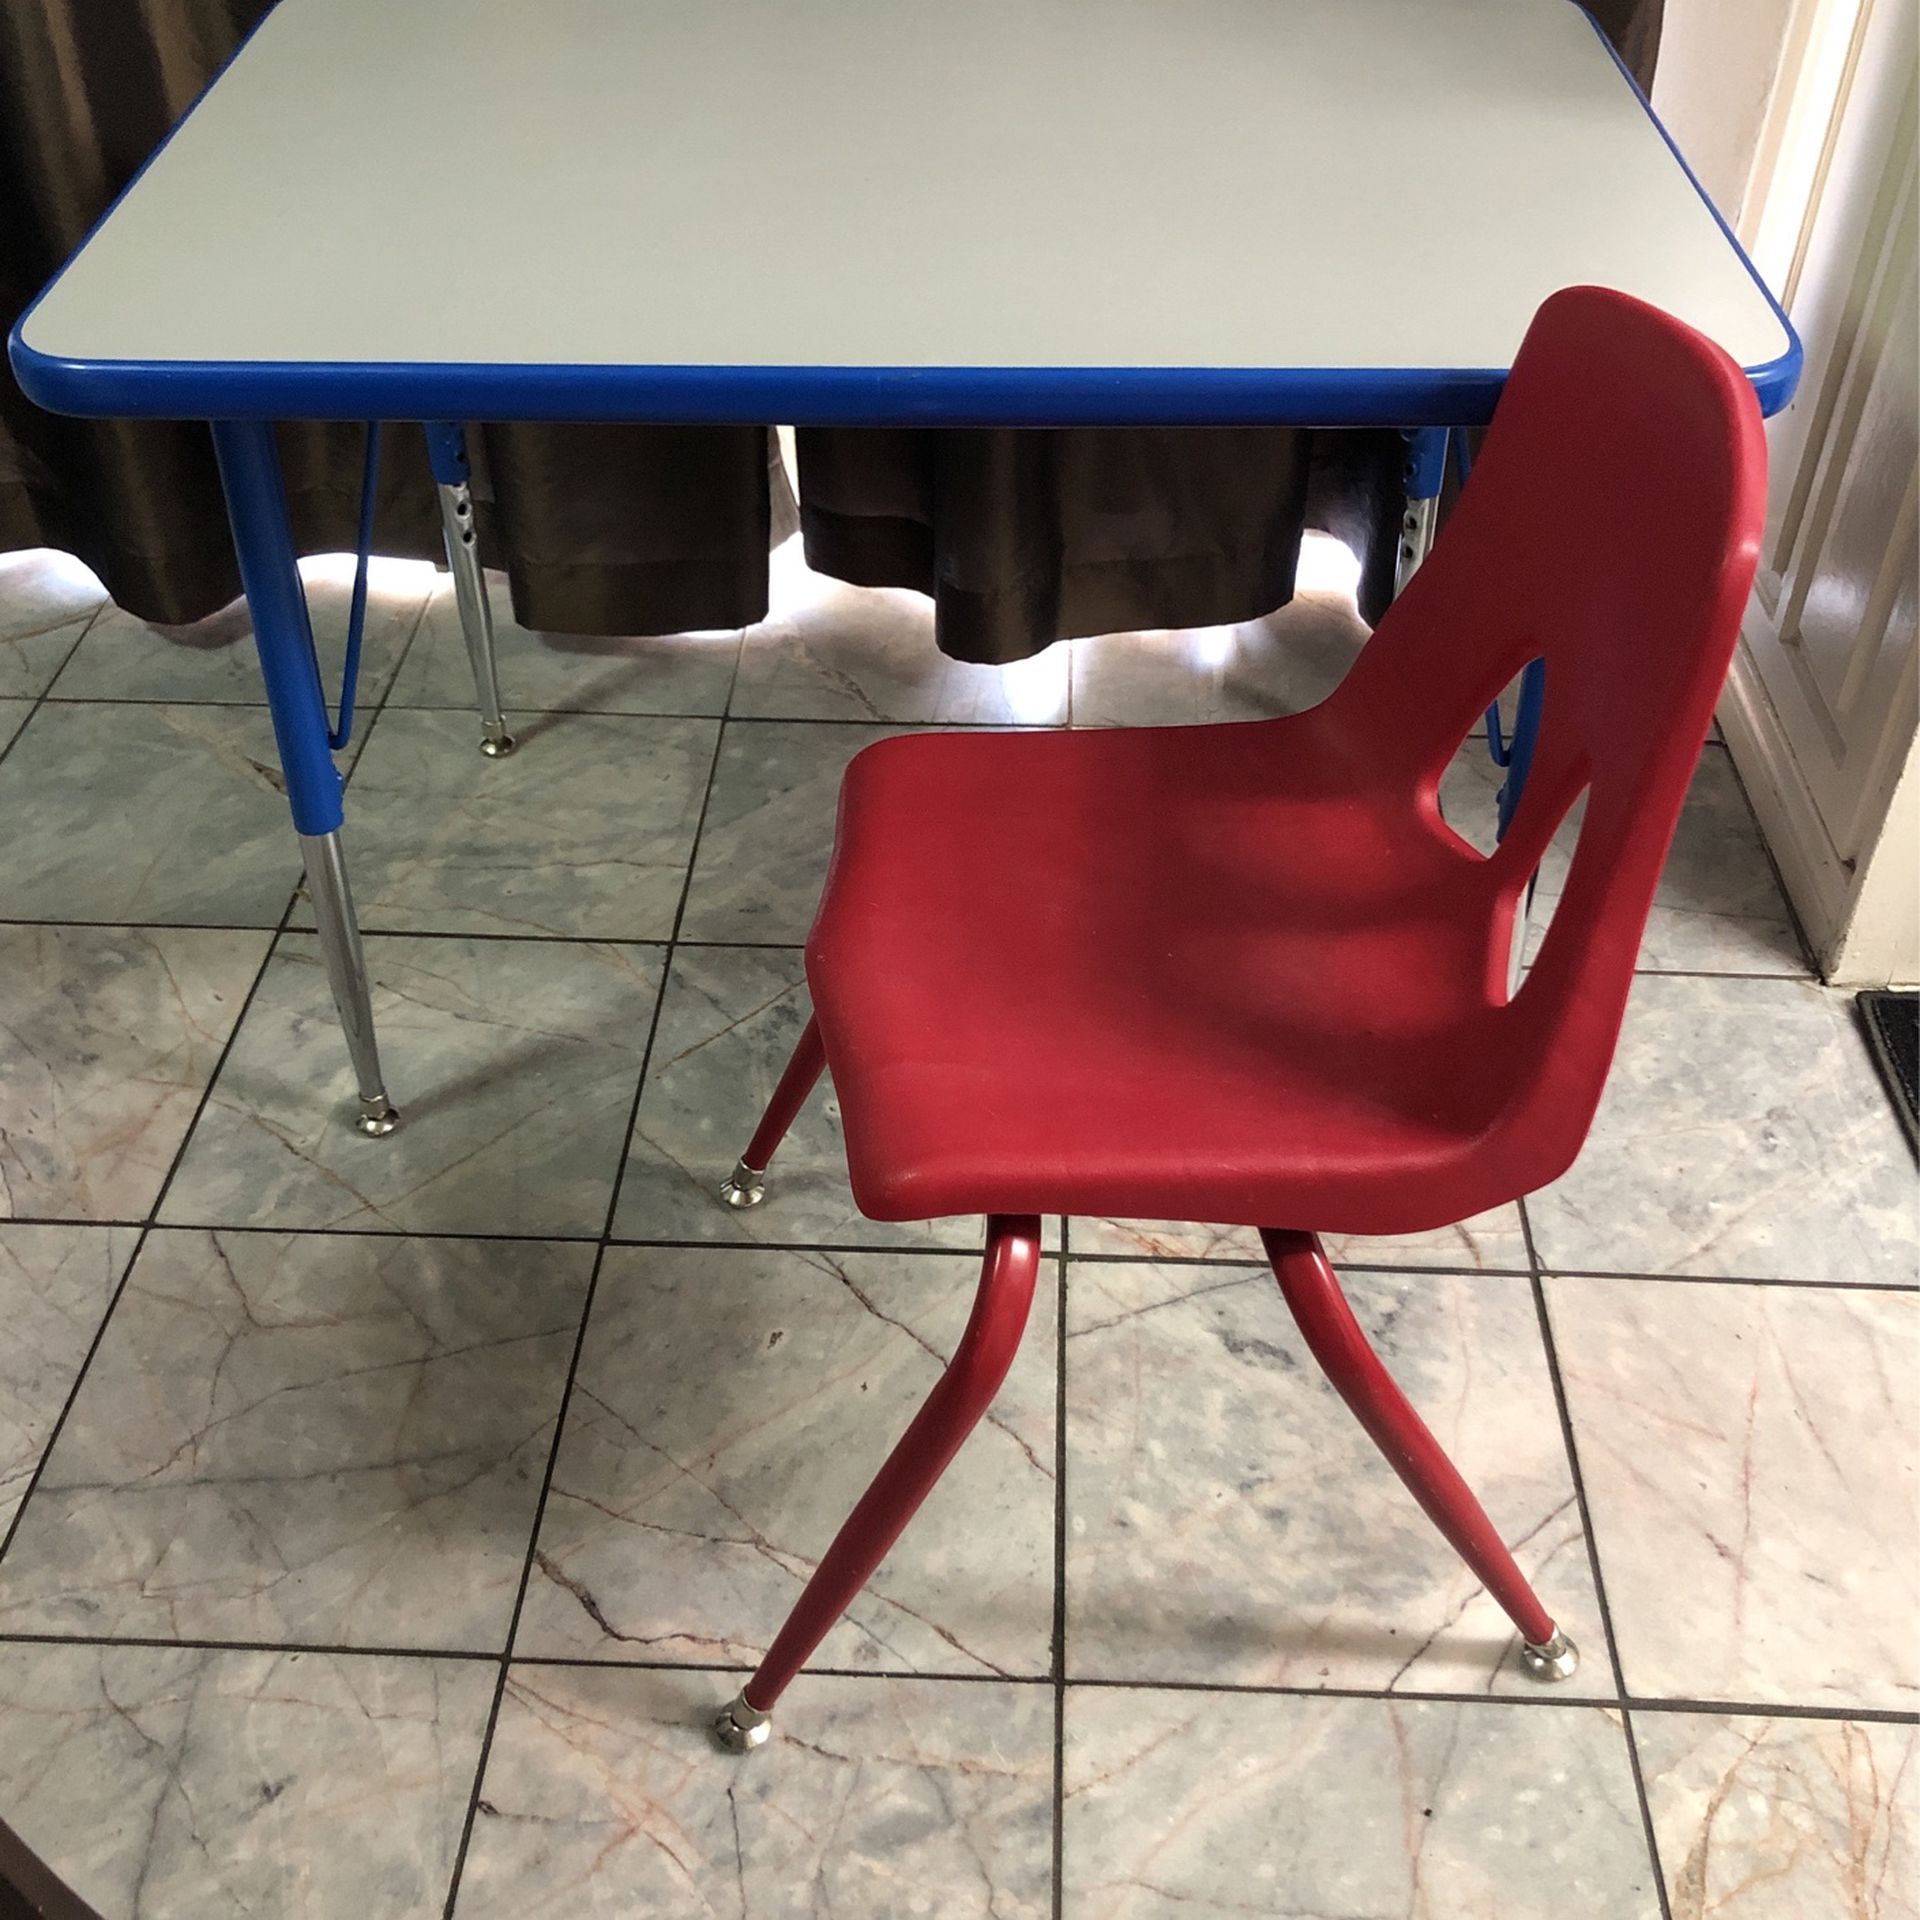 Preschool Table With One Chair $60.00